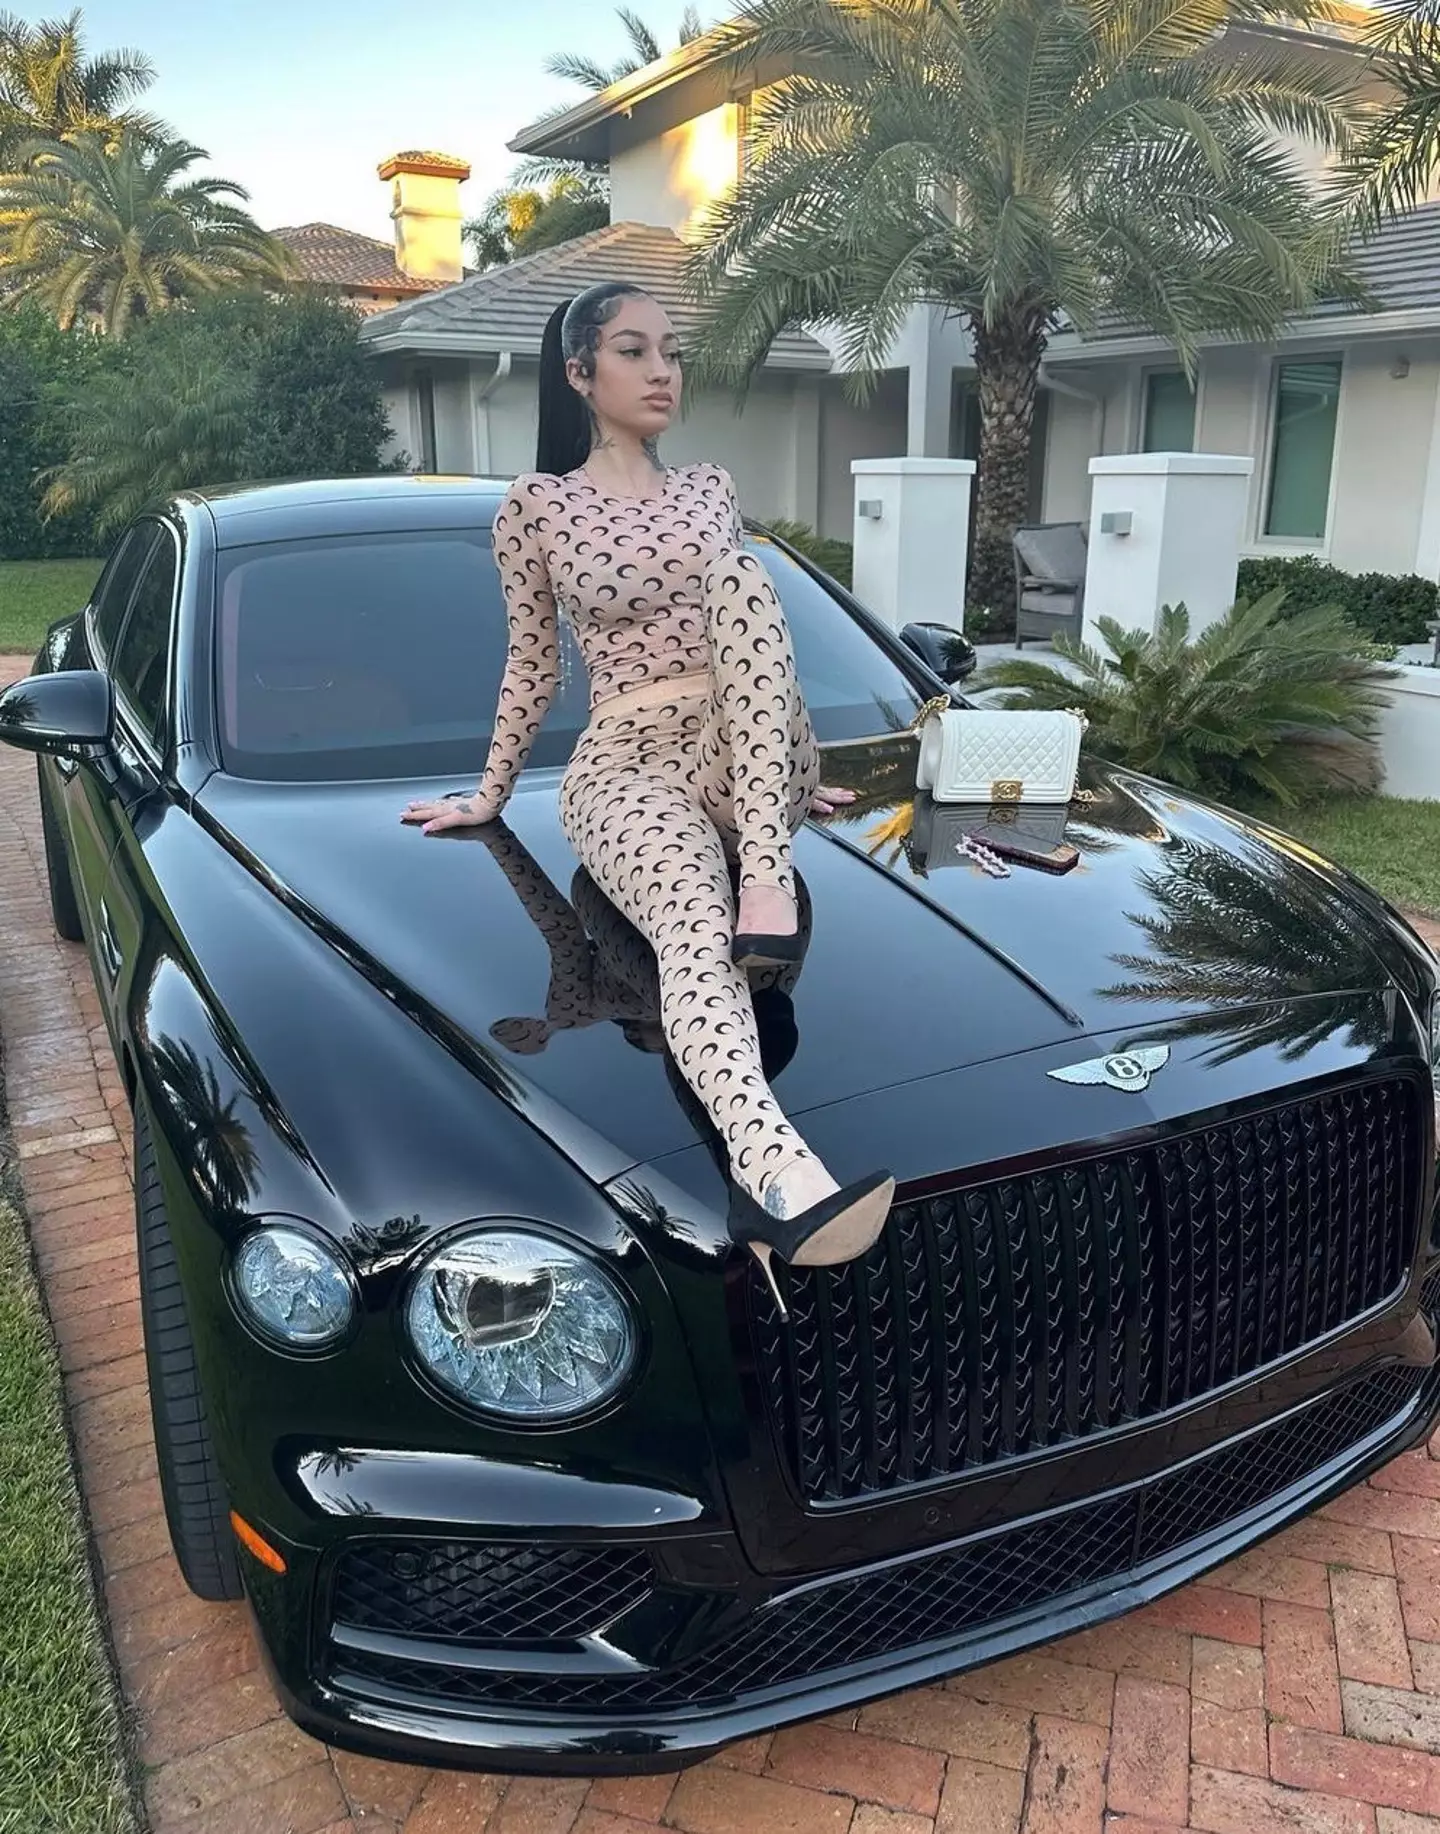 Rap star Bhad Bhabie has defended Chief Keef over allegations he 'groomed' her when they started dating.